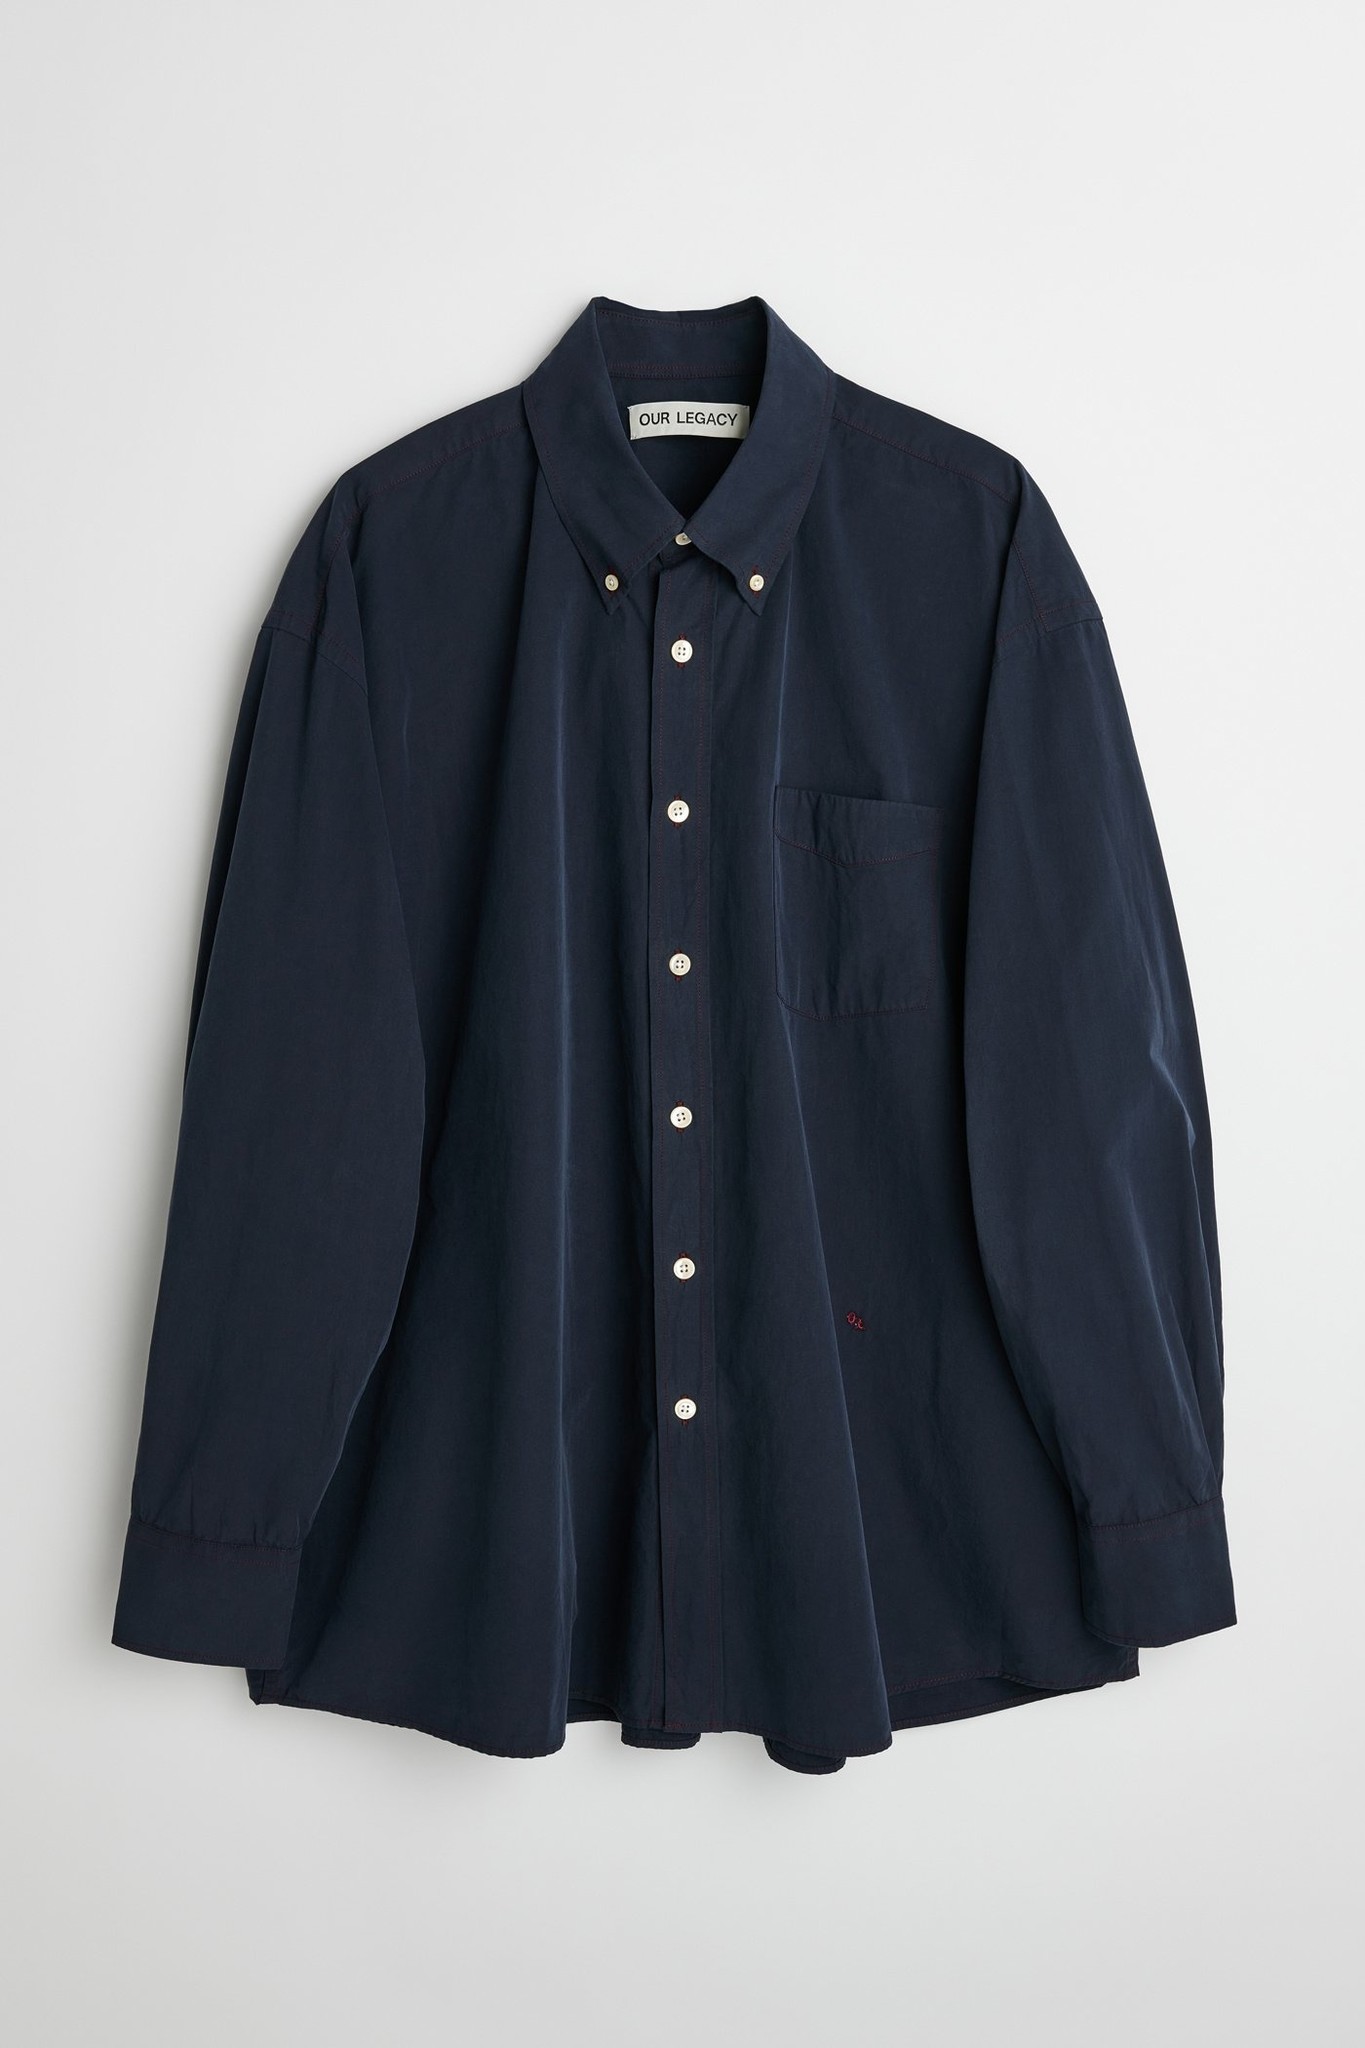 OUR LEGACY BORROWED BD SHIRT, NAVY HUMBLE COTTON